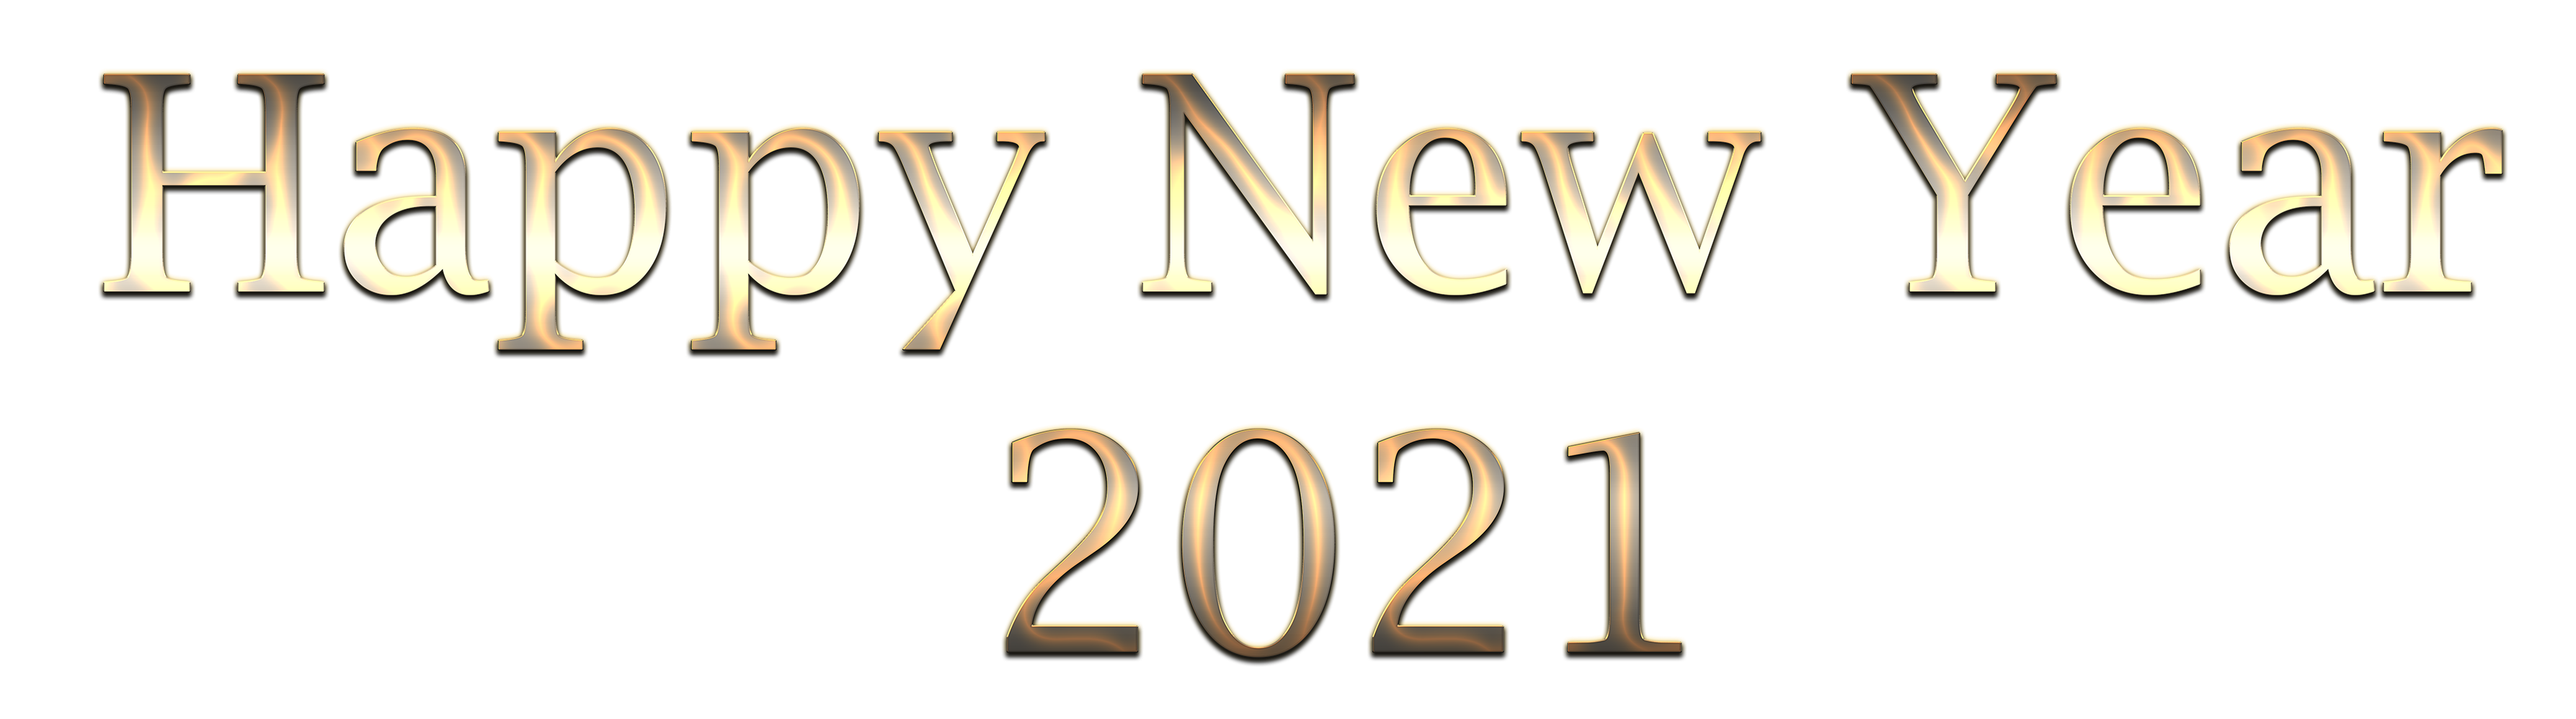 Year 2021 Happy Download HD PNG Image